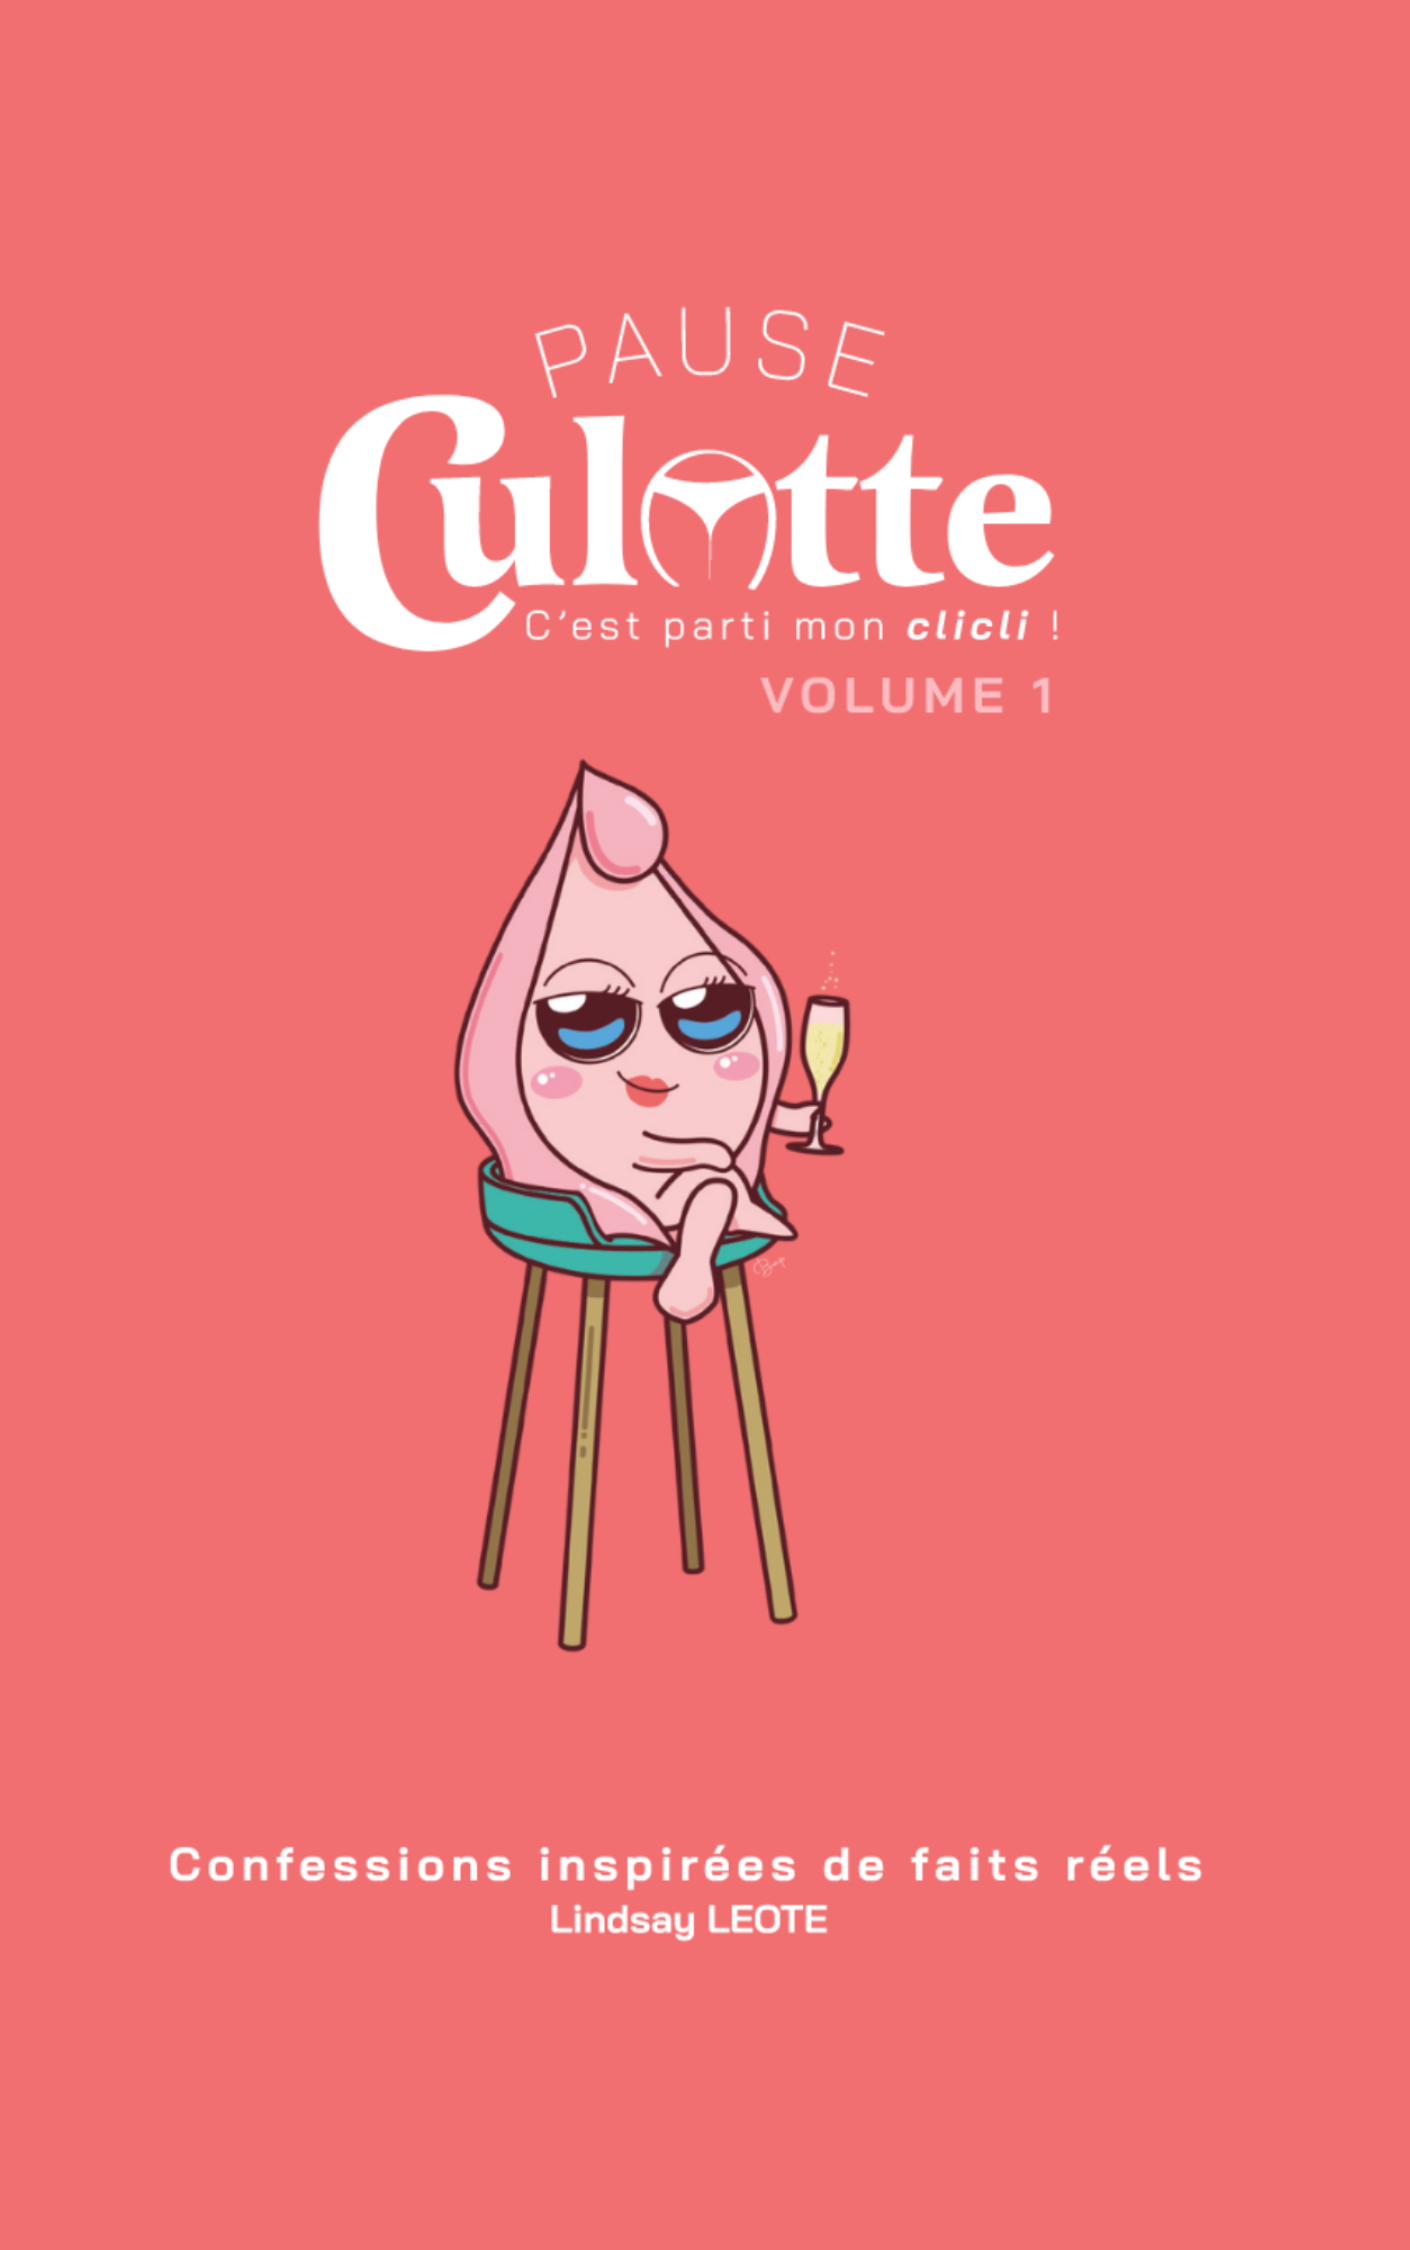 Pause Culotte - Volume 1: Intimate confessions drawn from real events